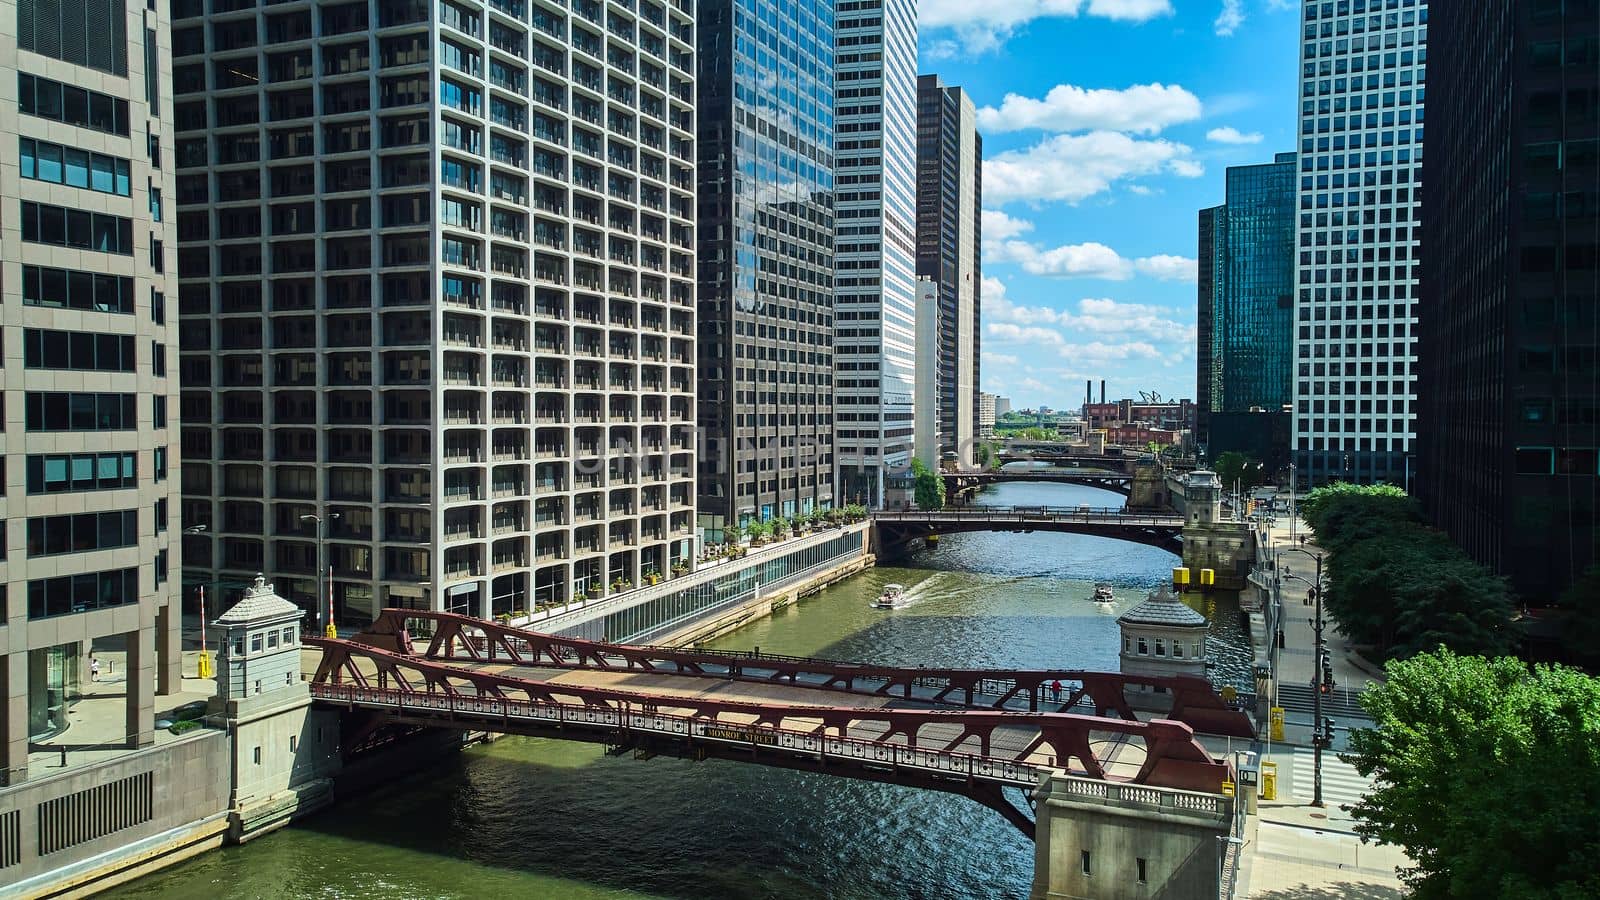 View down row of bridges through the Chicago ship canal surrounded by skyscrapers by njproductions